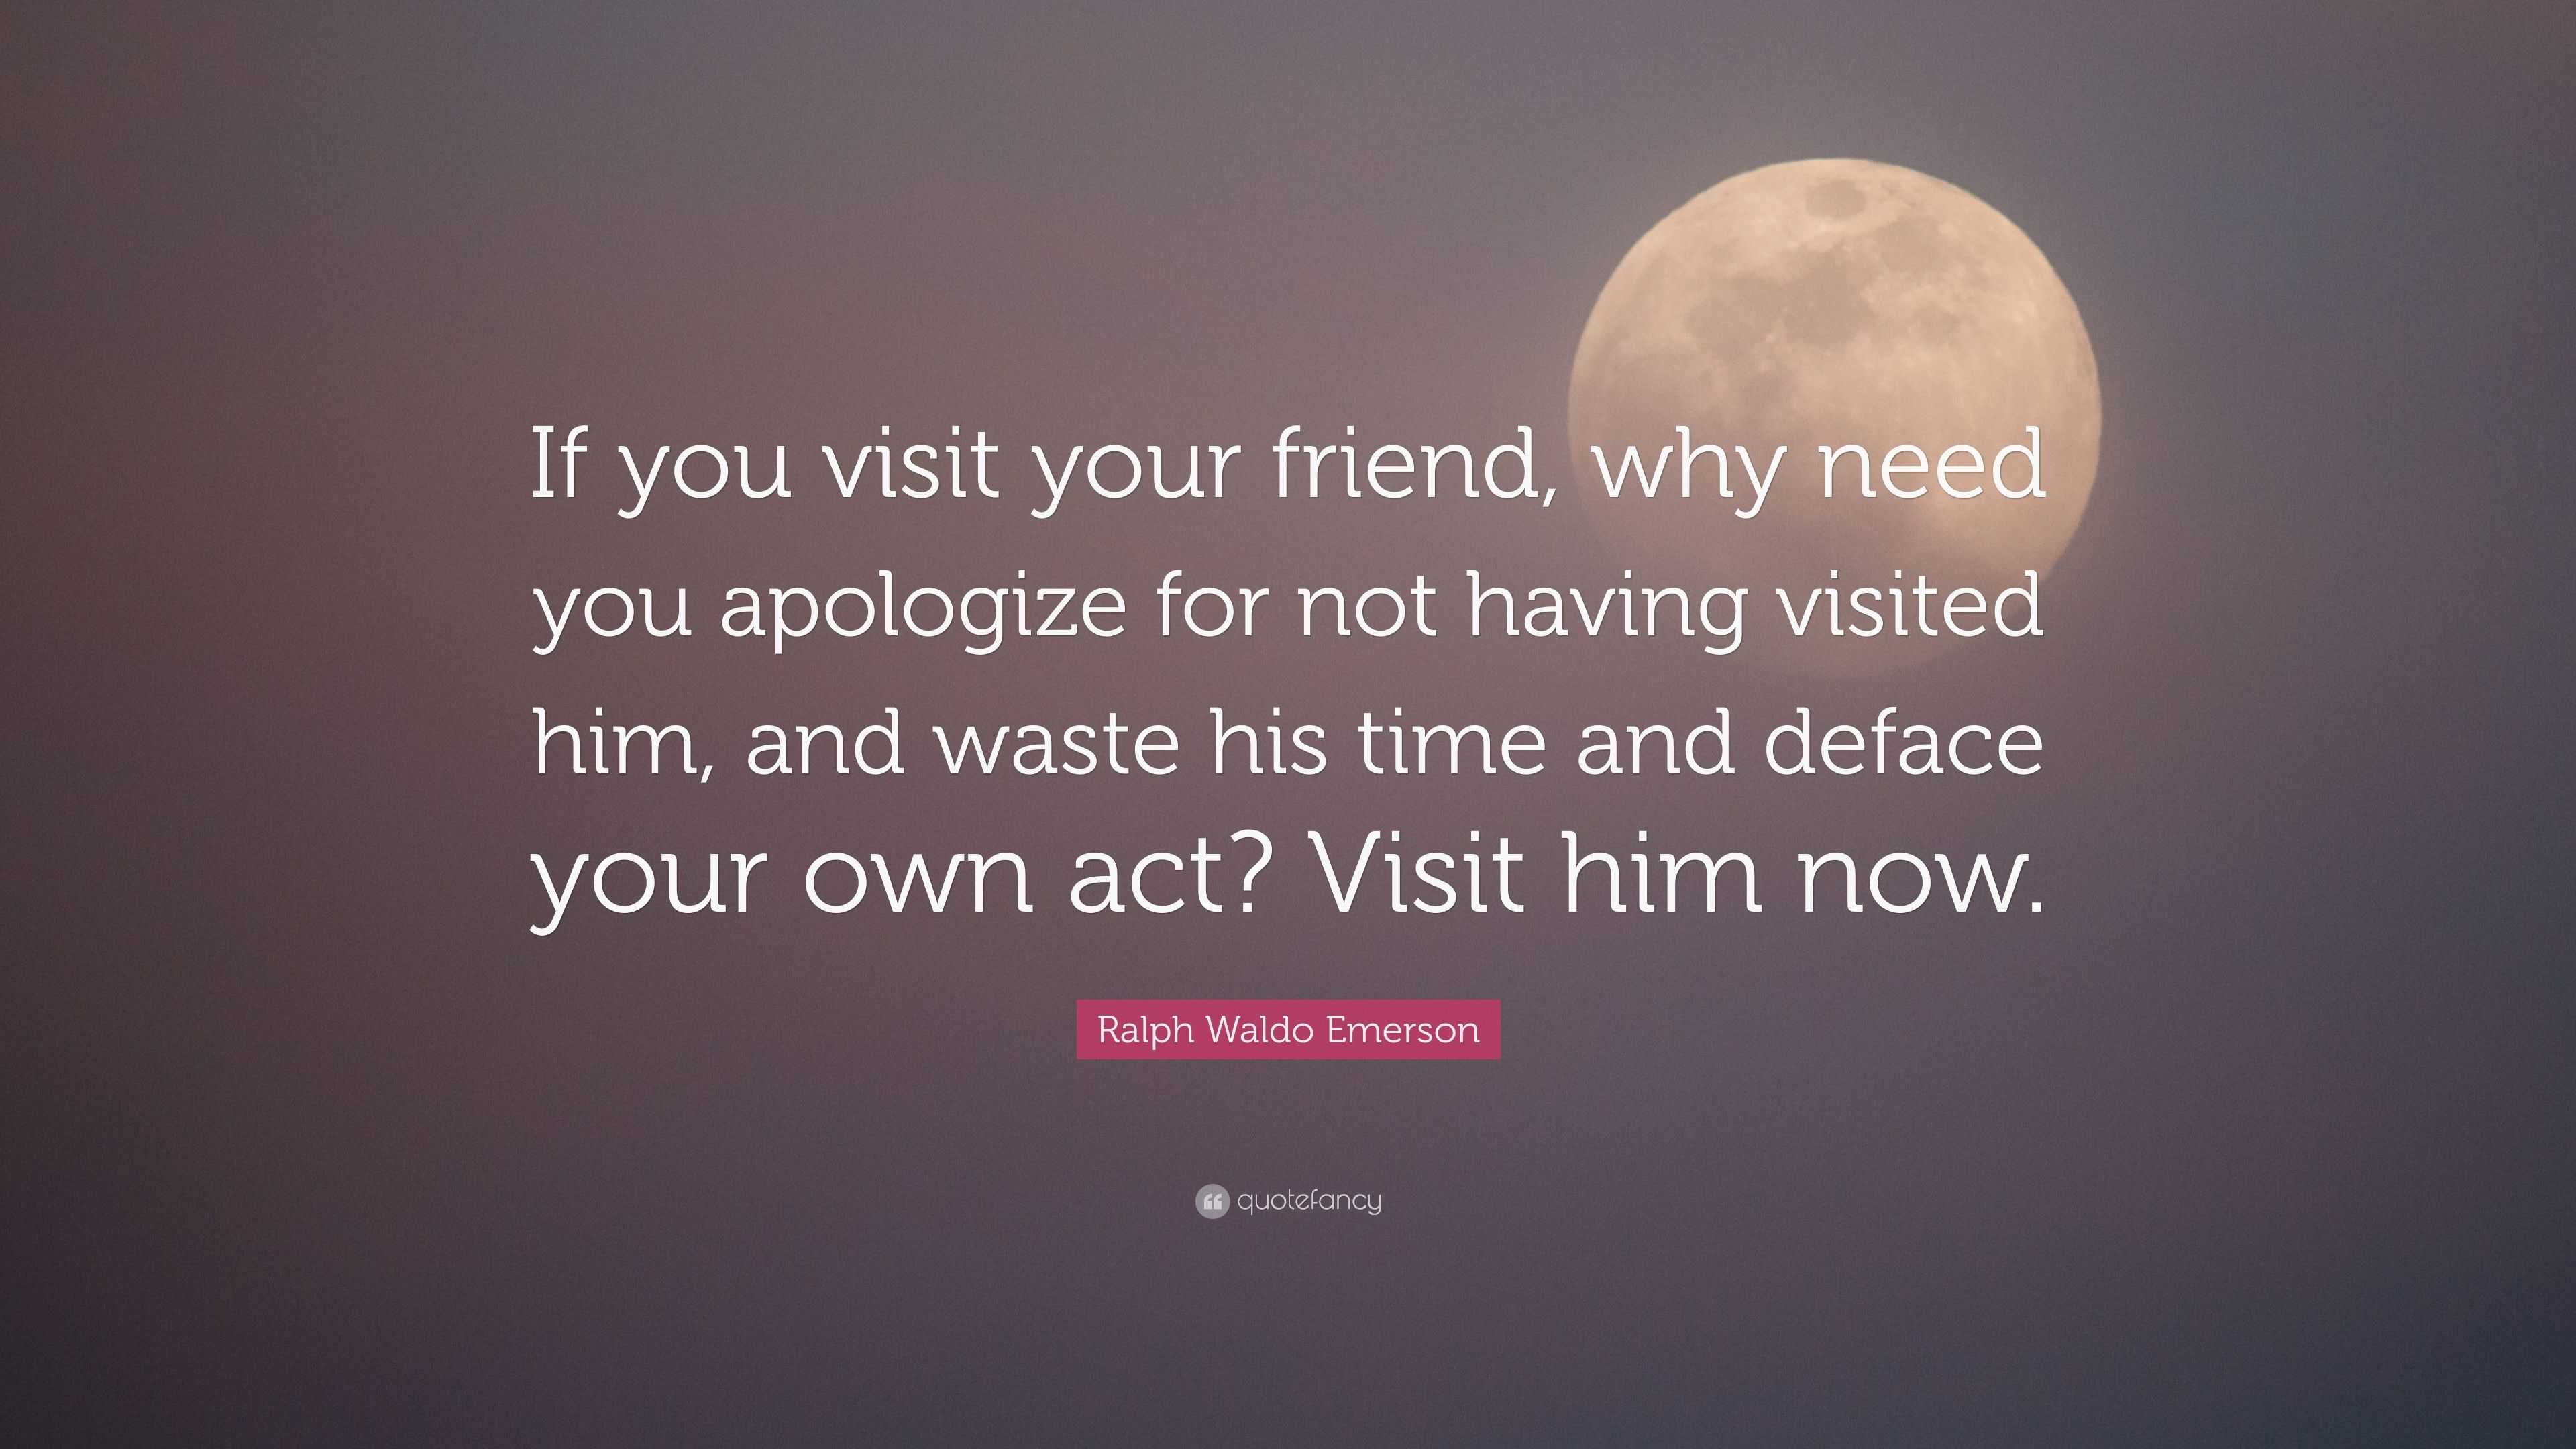 Ralph Waldo Emerson Quote: “If you visit your friend, why need you